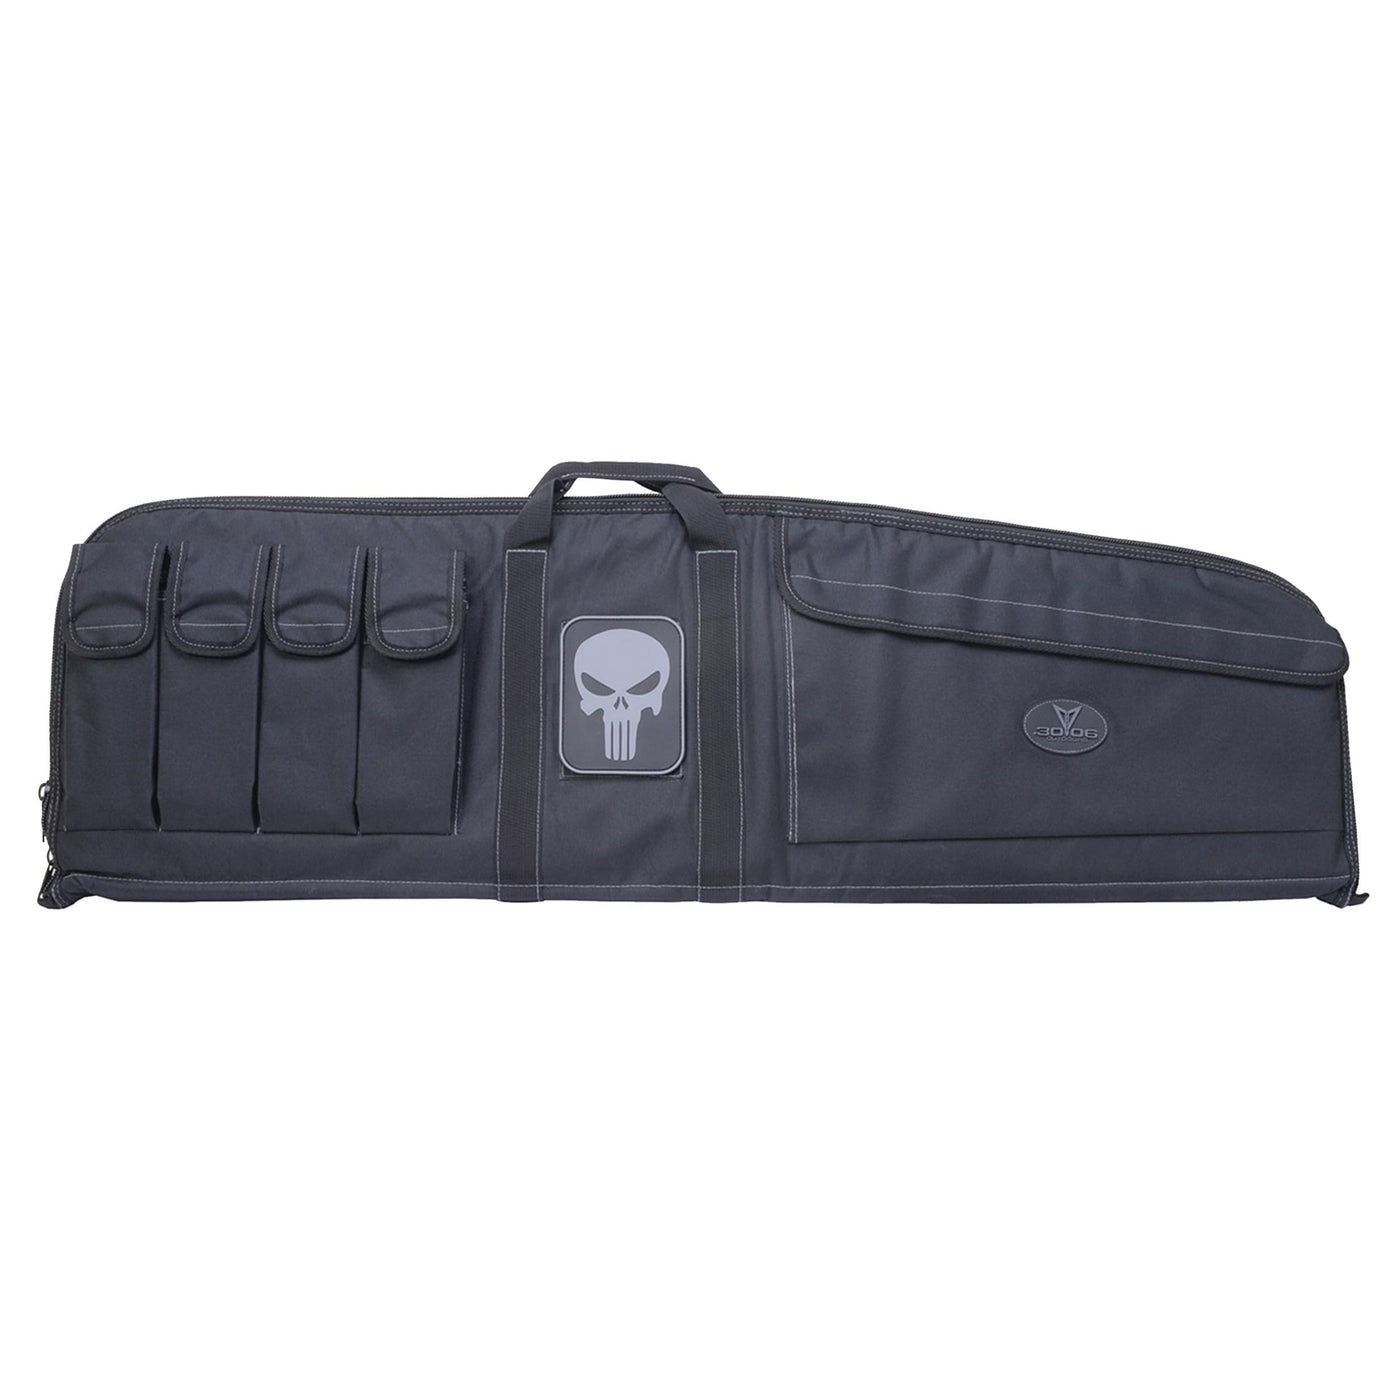 .30-06 Outdoors .30-06 OUTDOORS 41 in. Combat Tactical Case w/#1Skull Patch Shooting